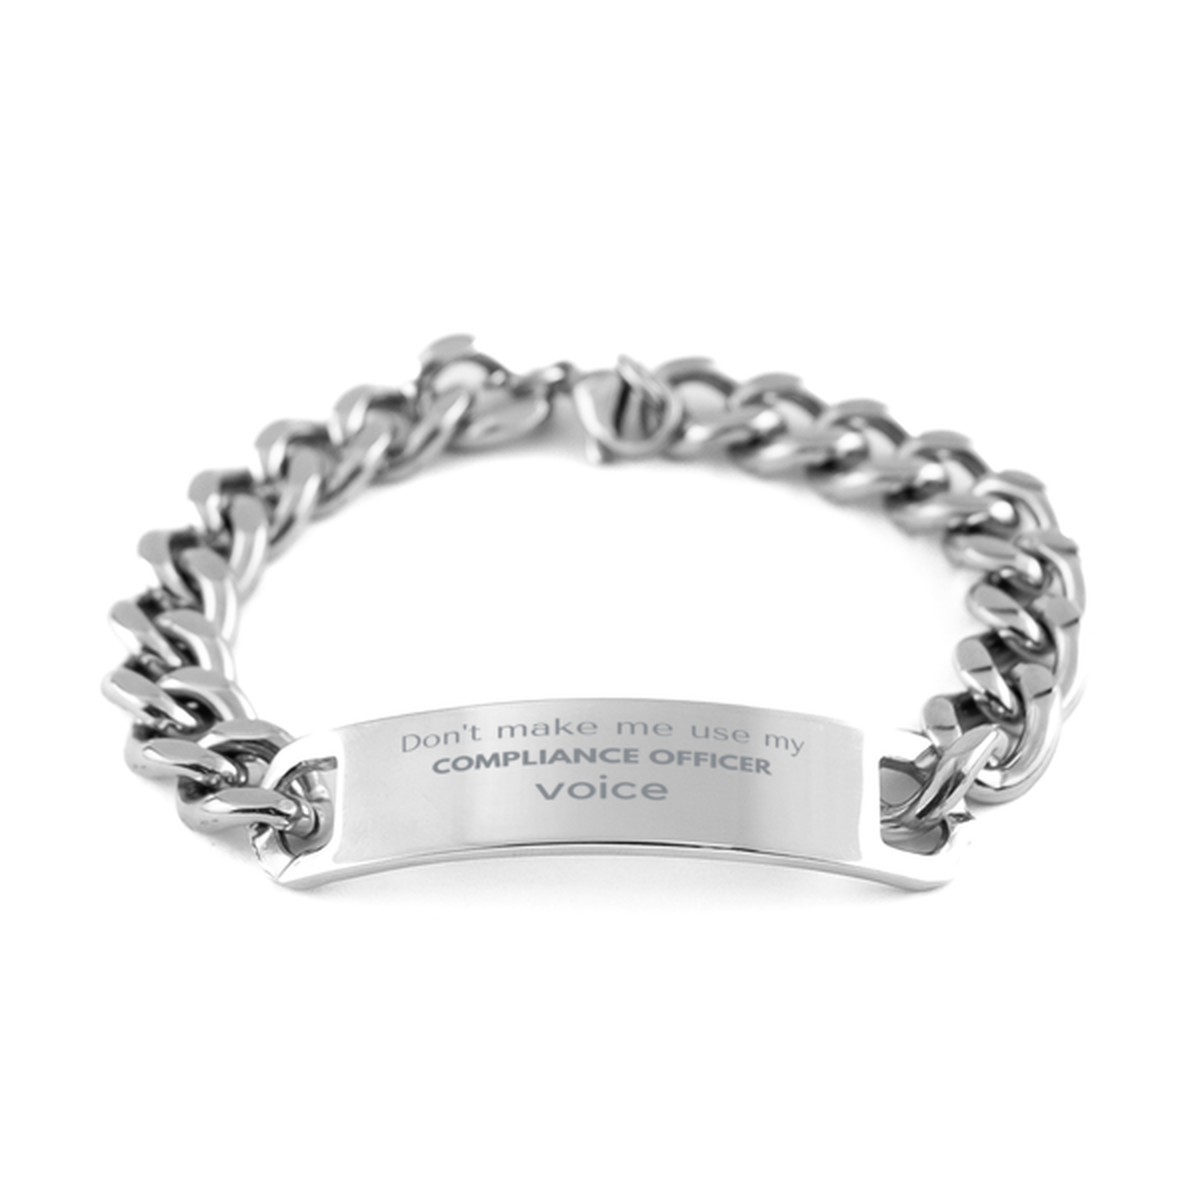 Don't make me use my Compliance Officer voice, Sarcasm Compliance Officer Gifts, Christmas Compliance Officer Cuban Chain Stainless Steel Bracelet Birthday Unique Gifts For Compliance Officer Coworkers, Men, Women, Colleague, Friends